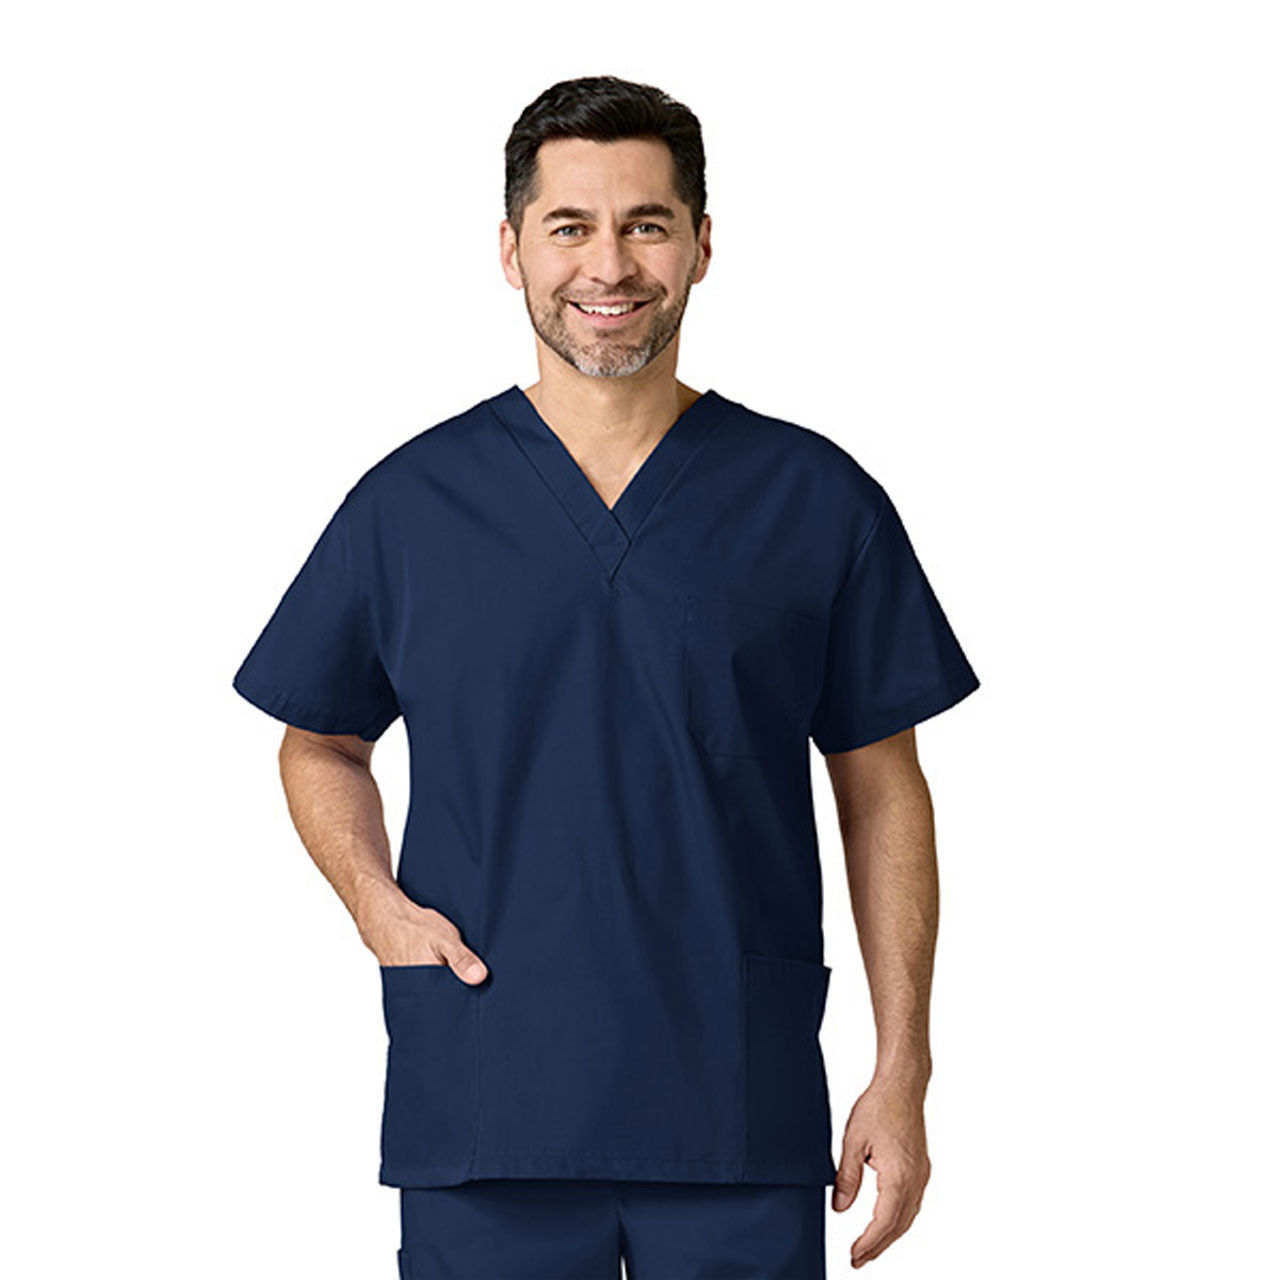 What are the features for breathability in the Navy Blue Scrub Tops?